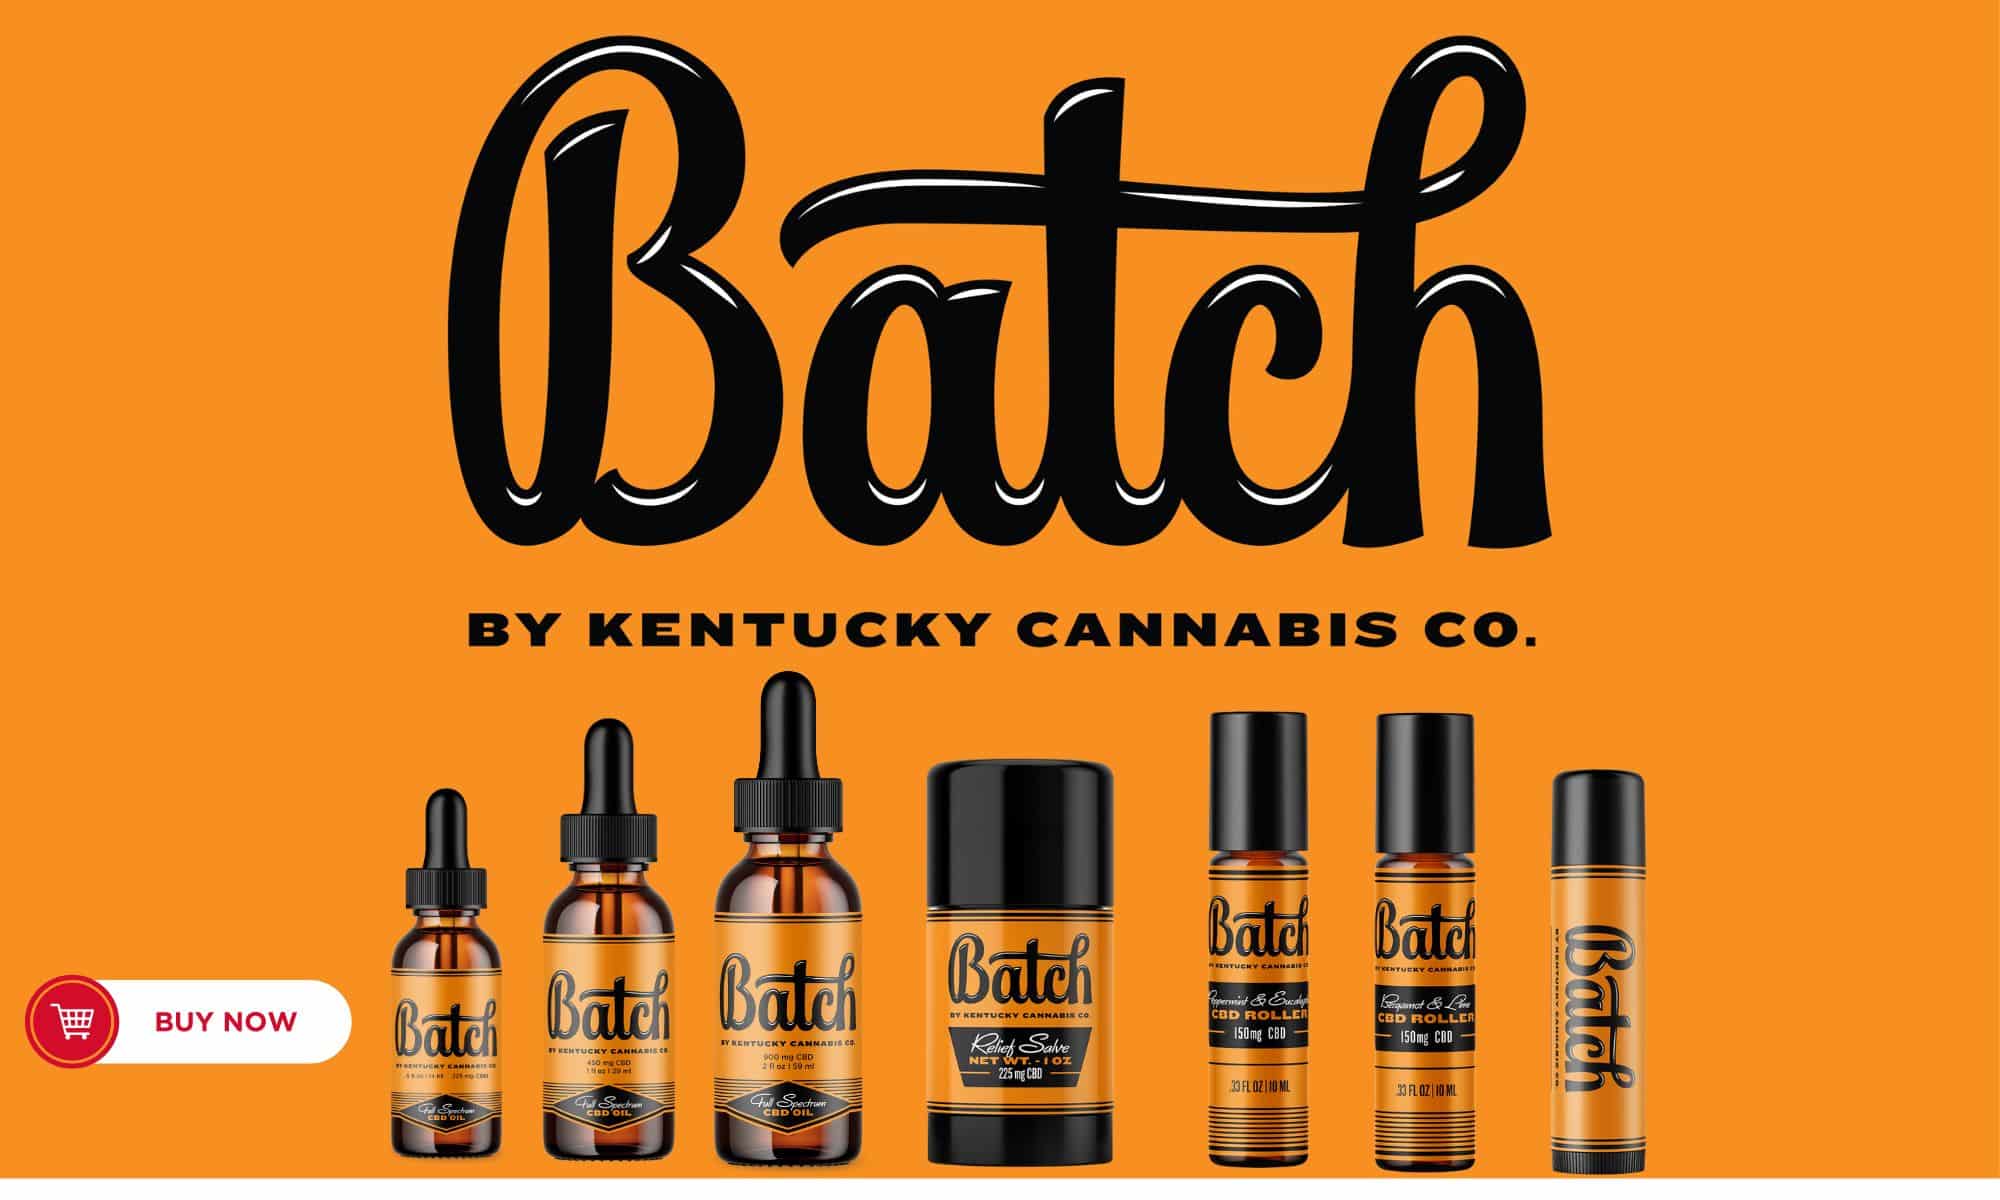 Bach-CBD-Oil logo alongside a display of Batch CBD products including .5, 1, and 2 oz sizes of full spectrum hemp extract, relieving salve, CBD rollers, and CBD lip balm.